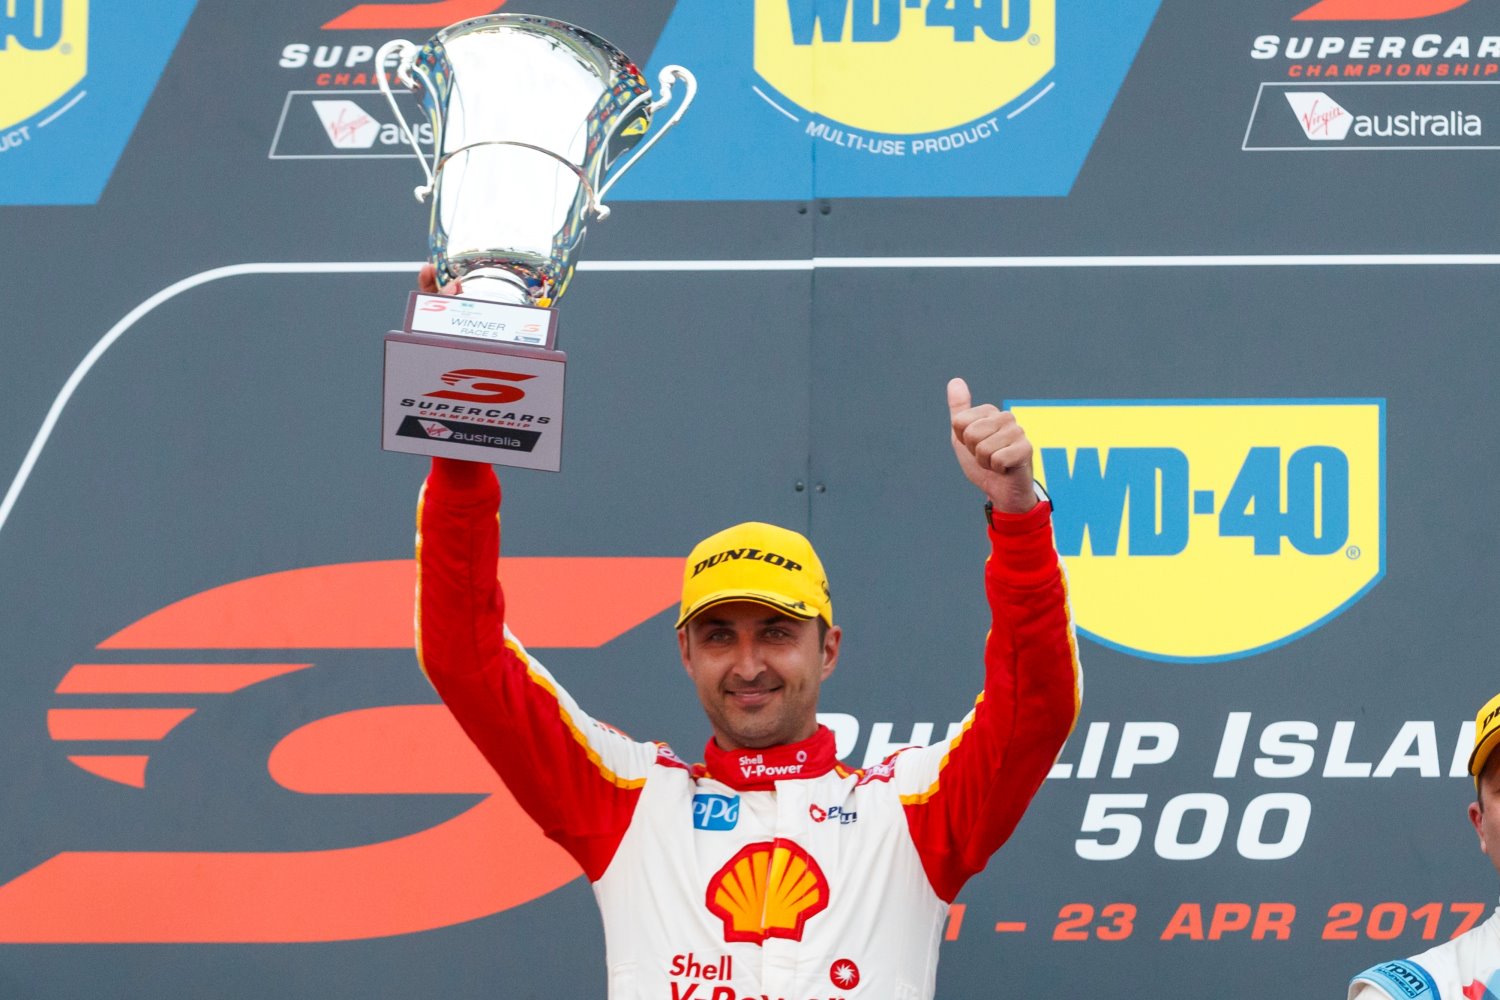 It was Coulthard's second win of the 2017, after his last time out victory in Tasmania.